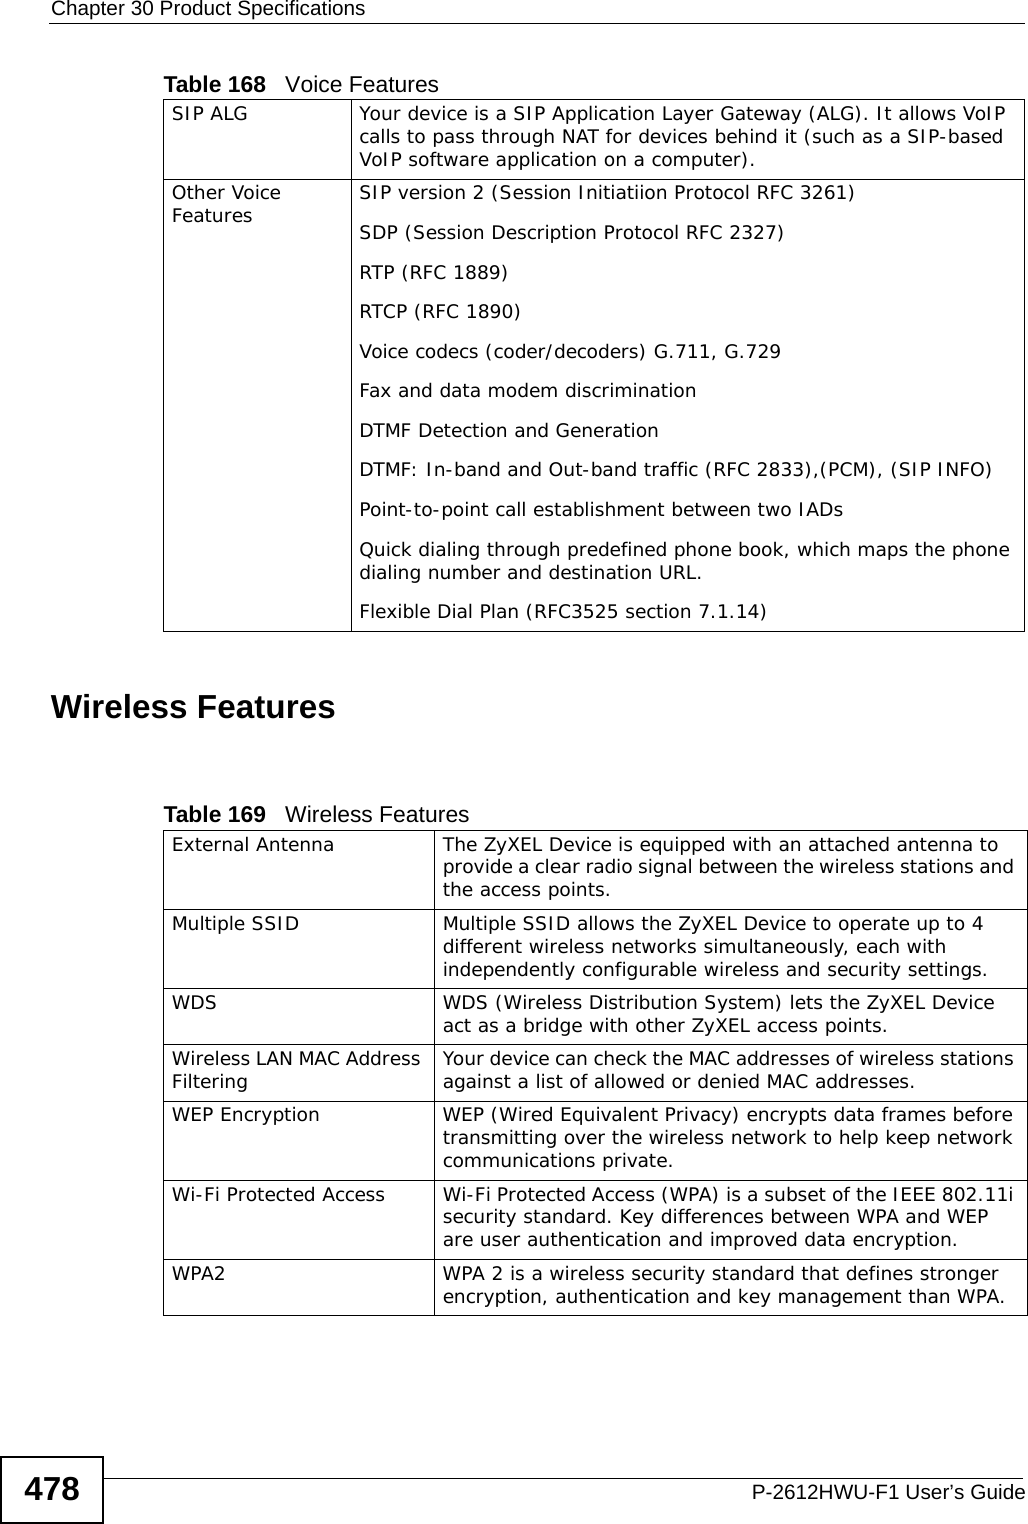 Chapter 30 Product SpecificationsP-2612HWU-F1 User’s Guide478Wireless Features SIP ALG Your device is a SIP Application Layer Gateway (ALG). It allows VoIP calls to pass through NAT for devices behind it (such as a SIP-based VoIP software application on a computer). Other Voice Features SIP version 2 (Session Initiatiion Protocol RFC 3261)SDP (Session Description Protocol RFC 2327)RTP (RFC 1889)RTCP (RFC 1890)Voice codecs (coder/decoders) G.711, G.729Fax and data modem discriminationDTMF Detection and GenerationDTMF: In-band and Out-band traffic (RFC 2833),(PCM), (SIP INFO) Point-to-point call establishment between two IADs Quick dialing through predefined phone book, which maps the phone dialing number and destination URL.Flexible Dial Plan (RFC3525 section 7.1.14)Table 168   Voice FeaturesTable 169   Wireless FeaturesExternal Antenna  The ZyXEL Device is equipped with an attached antenna to provide a clear radio signal between the wireless stations and the access points.Multiple SSID Multiple SSID allows the ZyXEL Device to operate up to 4 different wireless networks simultaneously, each with independently configurable wireless and security settings.WDS WDS (Wireless Distribution System) lets the ZyXEL Device act as a bridge with other ZyXEL access points.Wireless LAN MAC Address Filtering  Your device can check the MAC addresses of wireless stations against a list of allowed or denied MAC addresses.WEP Encryption WEP (Wired Equivalent Privacy) encrypts data frames before transmitting over the wireless network to help keep network communications private.Wi-Fi Protected Access  Wi-Fi Protected Access (WPA) is a subset of the IEEE 802.11i security standard. Key differences between WPA and WEP are user authentication and improved data encryption.WPA2  WPA 2 is a wireless security standard that defines stronger encryption, authentication and key management than WPA.